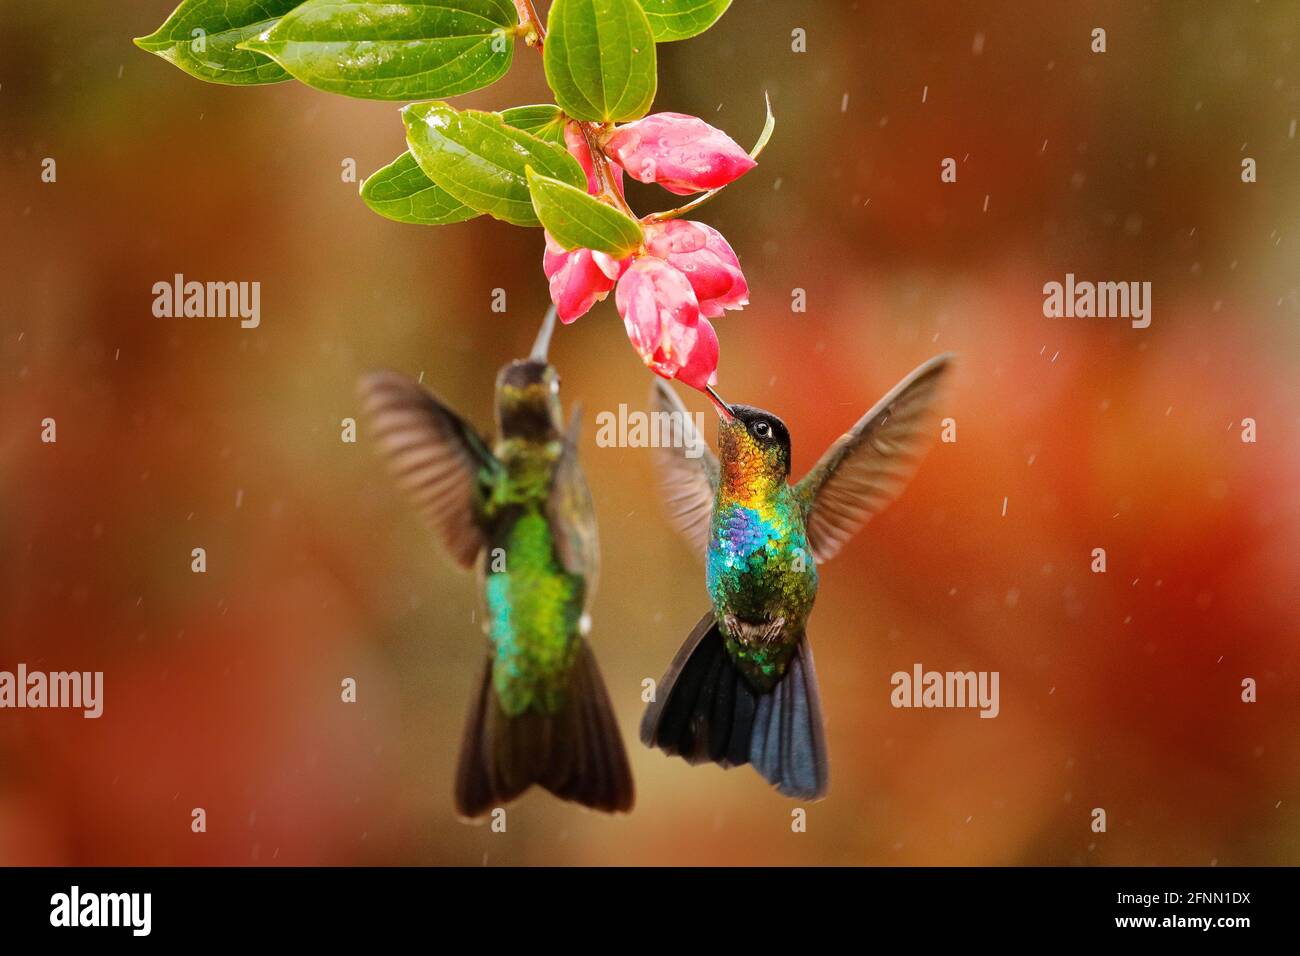 Fiery-throated Hummingbird, Panterpe insignis, shiny colorful bird in flight, sucking nectar from bloom. Wildlife flight action scene from tropical fo Stock Photo